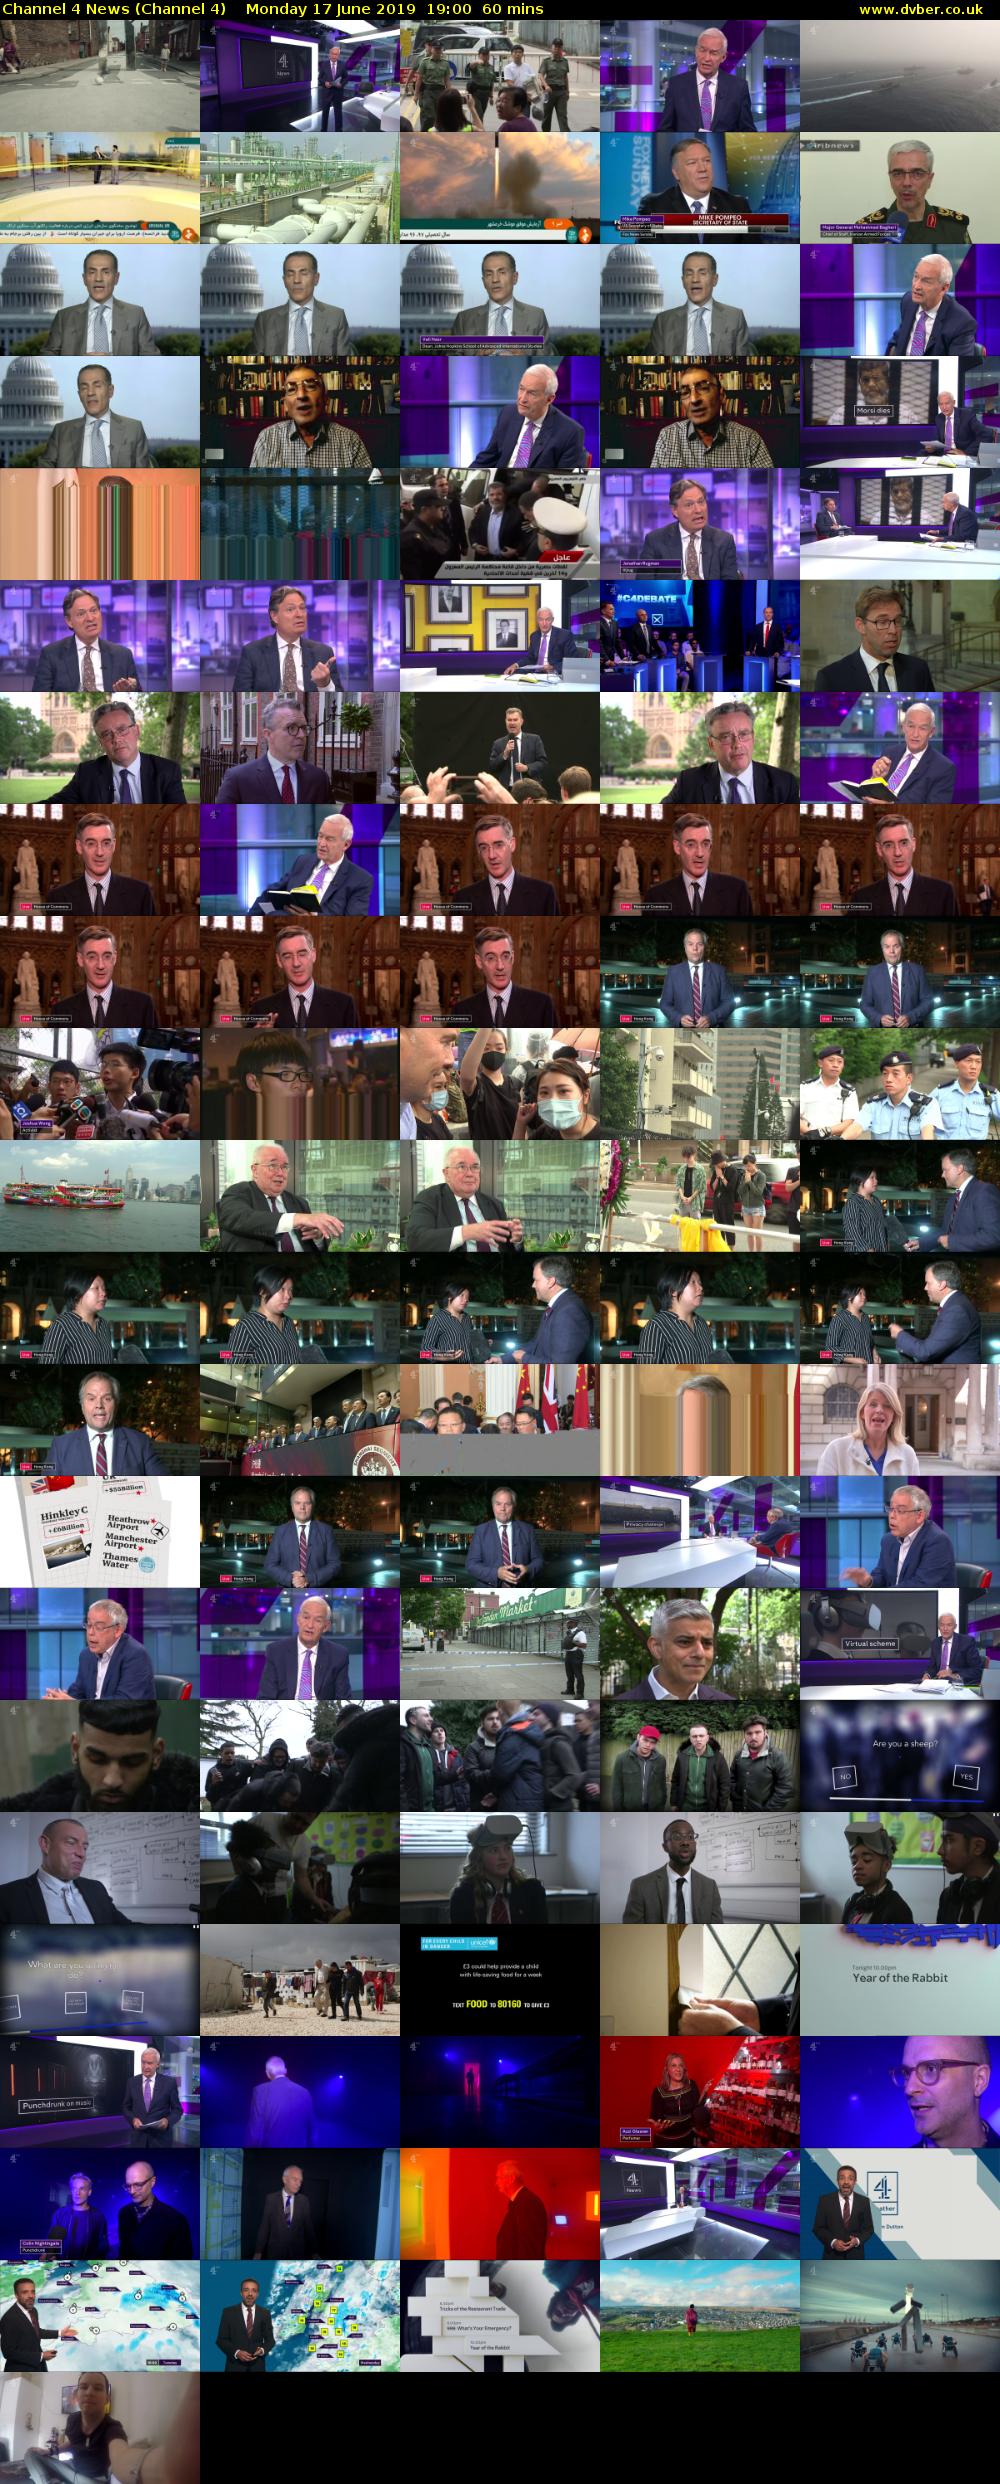 Channel 4 News (Channel 4) Monday 17 June 2019 19:00 - 20:00